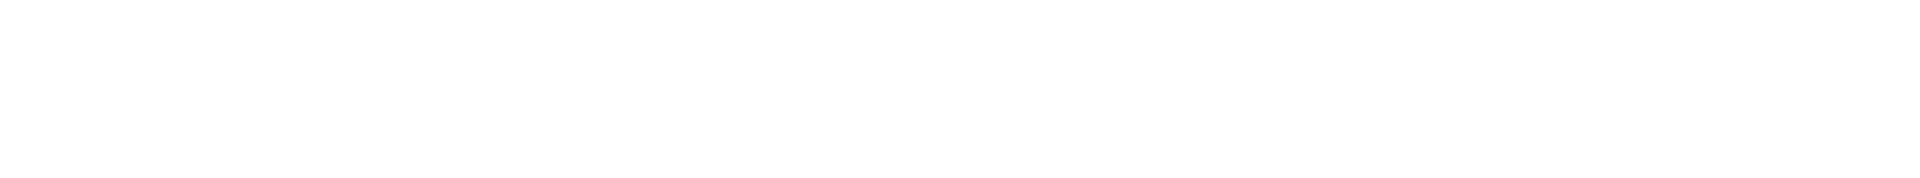 A green and white striped pattern with two lines.